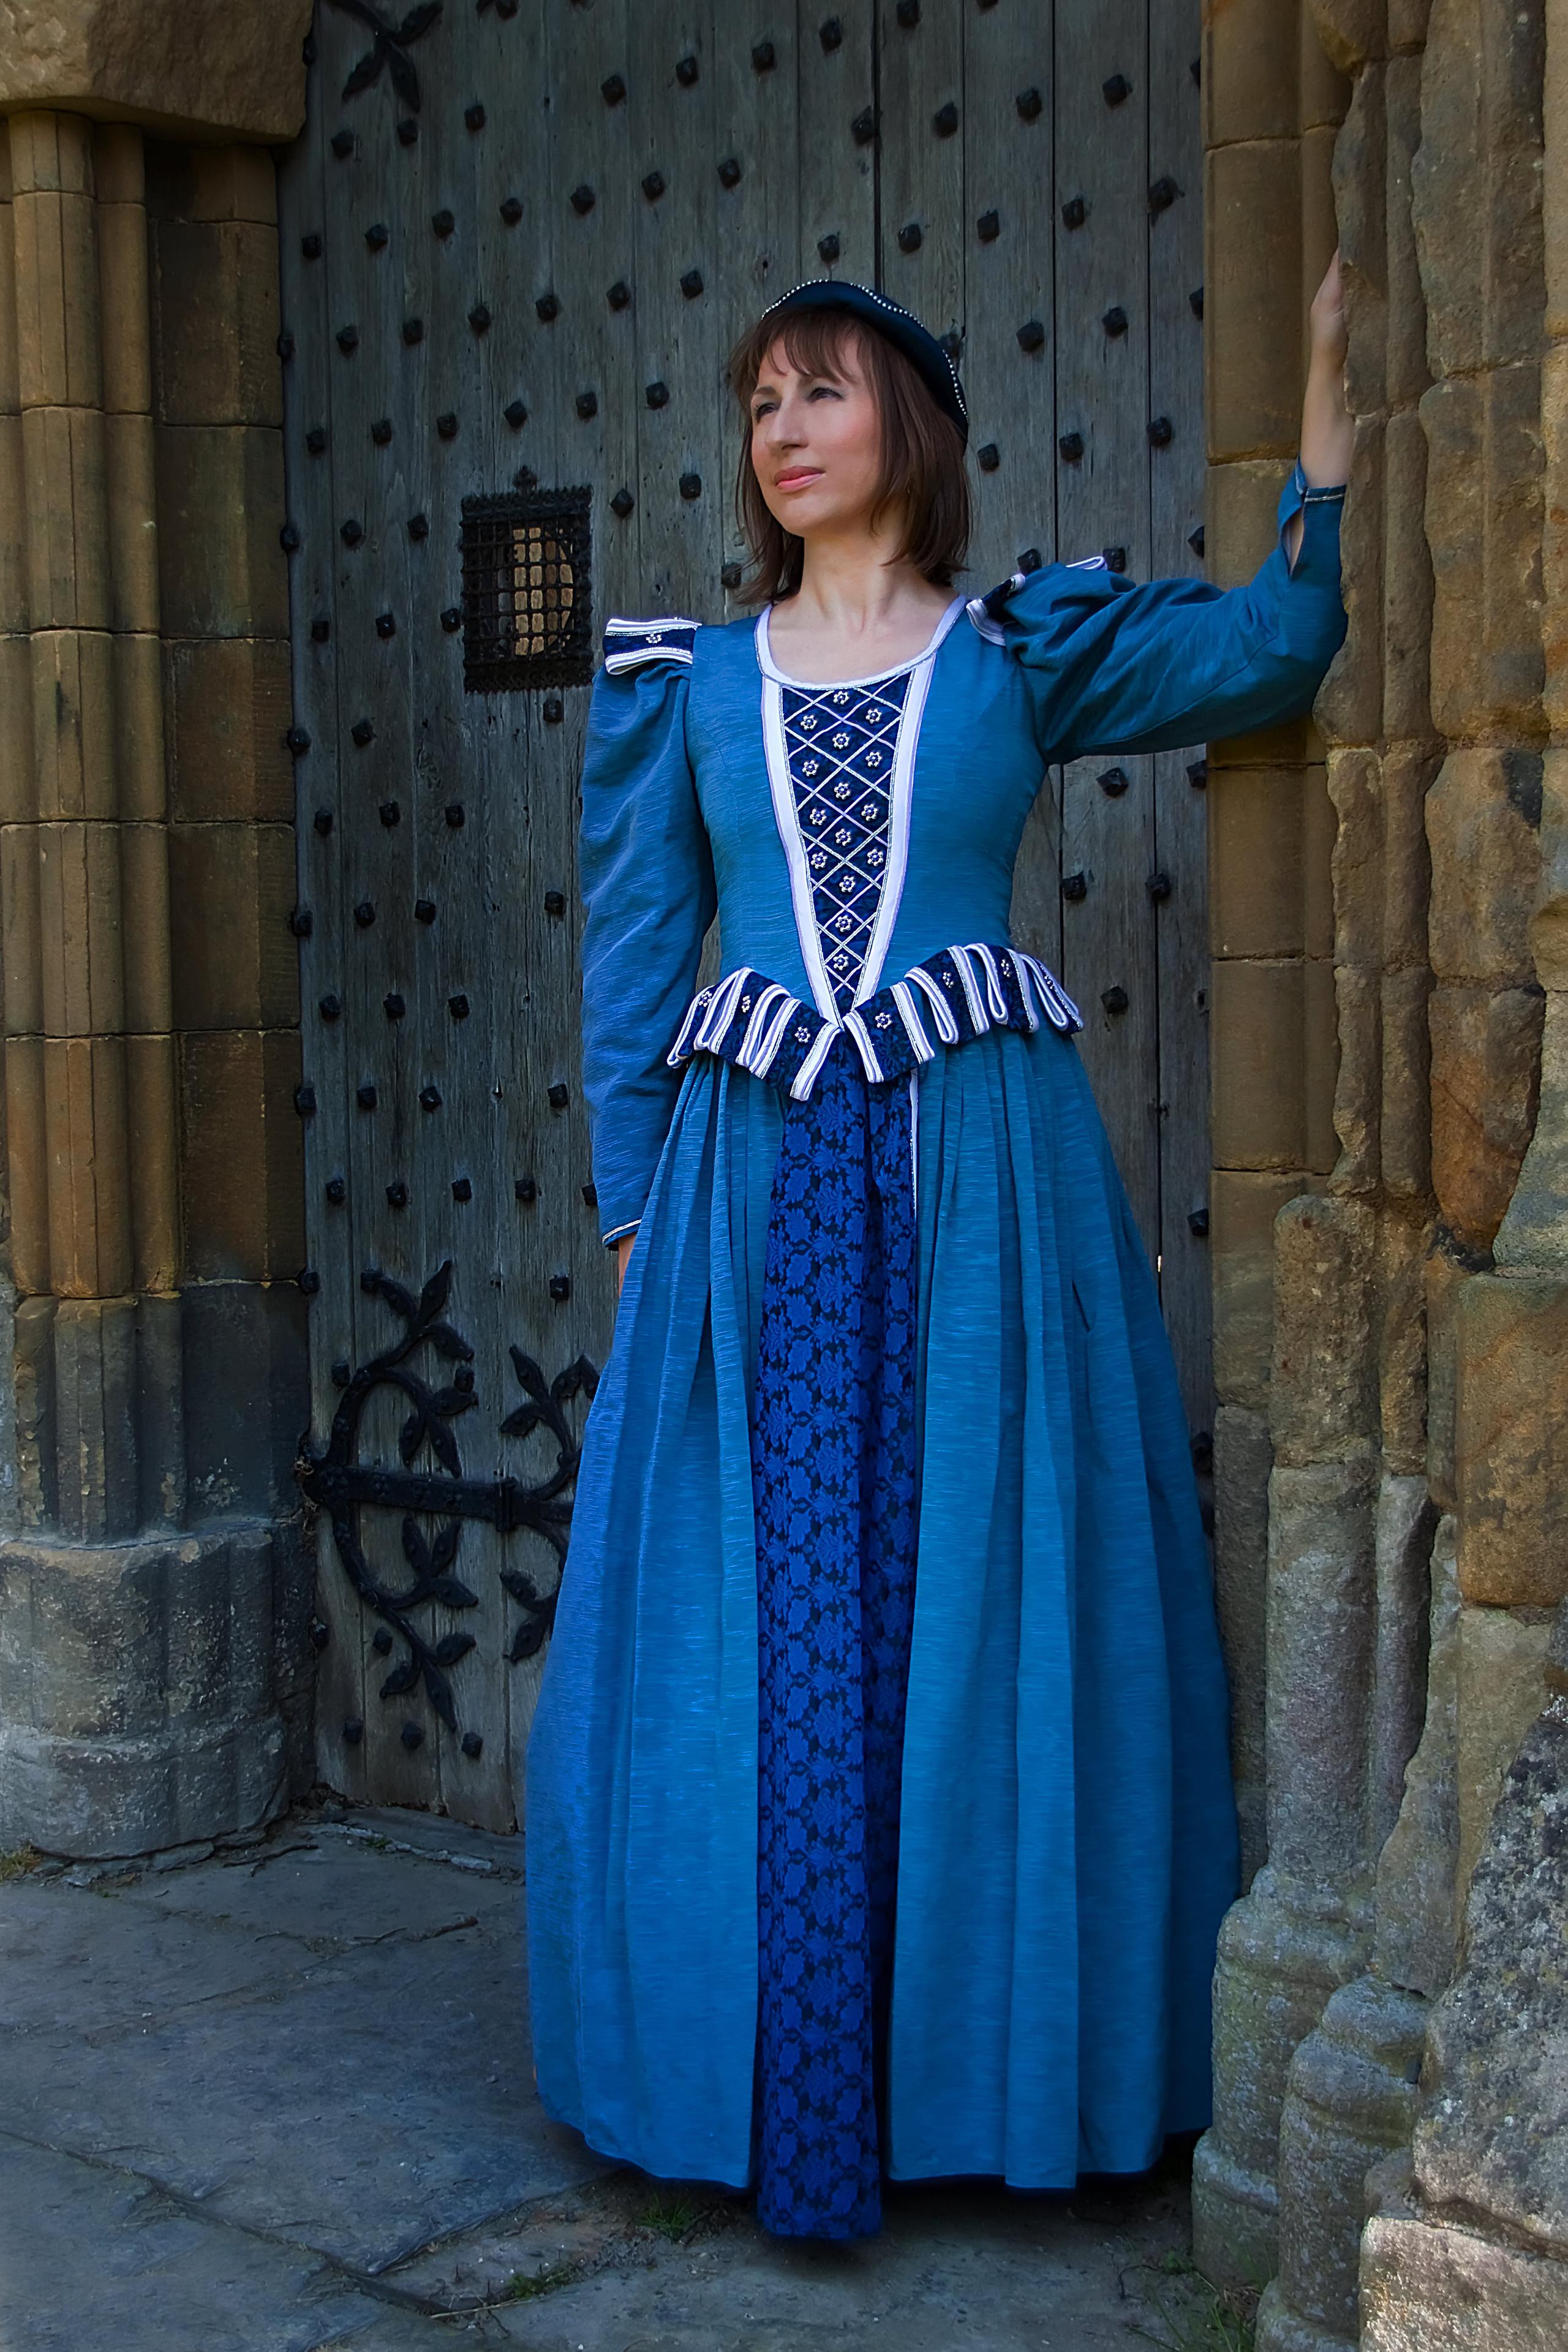 blue medieval gown. contrast in heavy brocade with white pipping